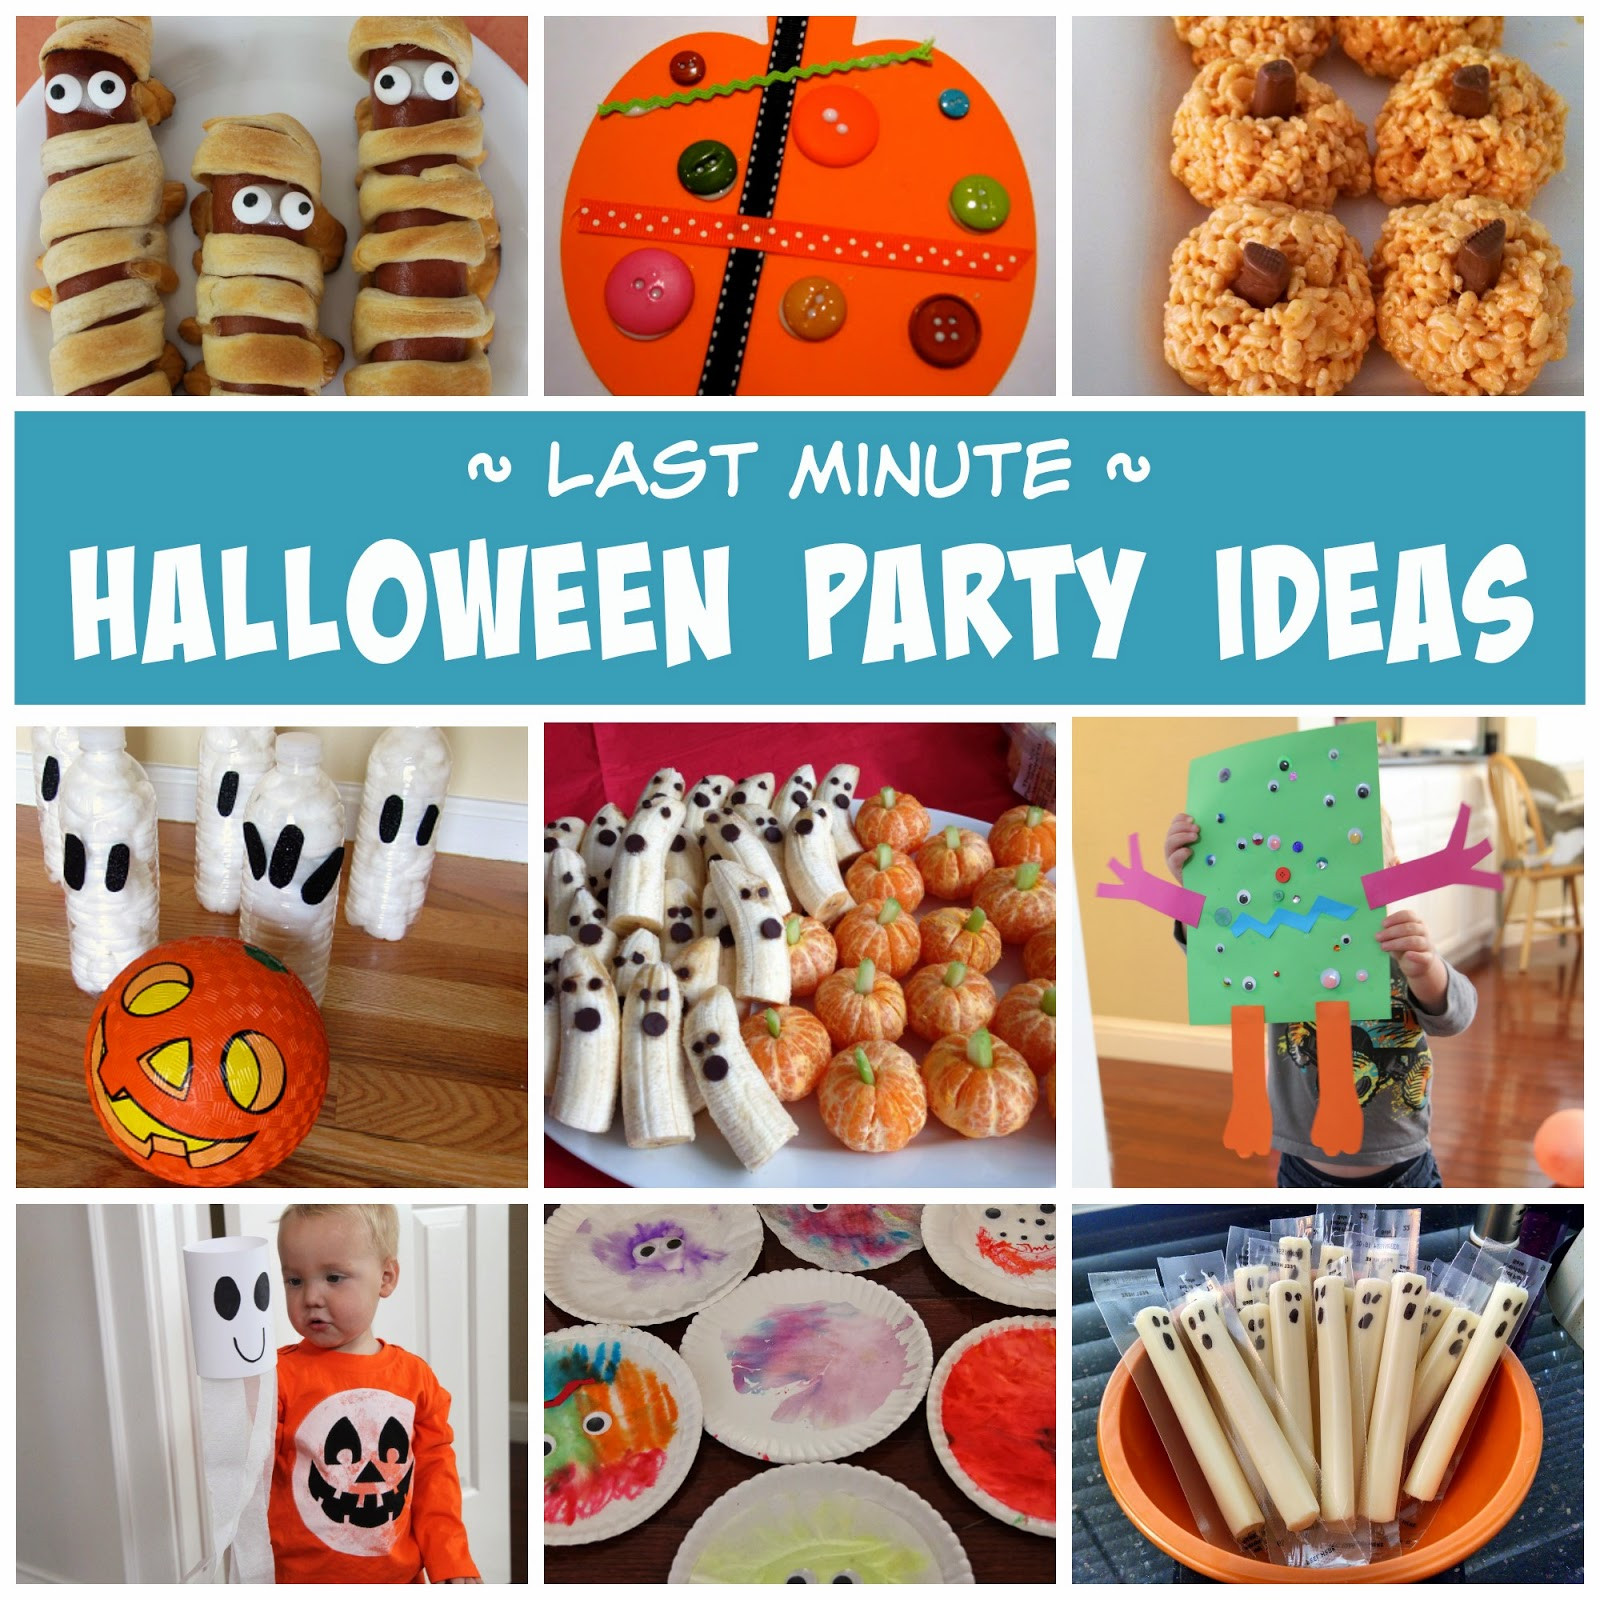 Toddler Halloween Birthday Party Ideas
 Toddler Approved Last Minute Halloween Party Ideas